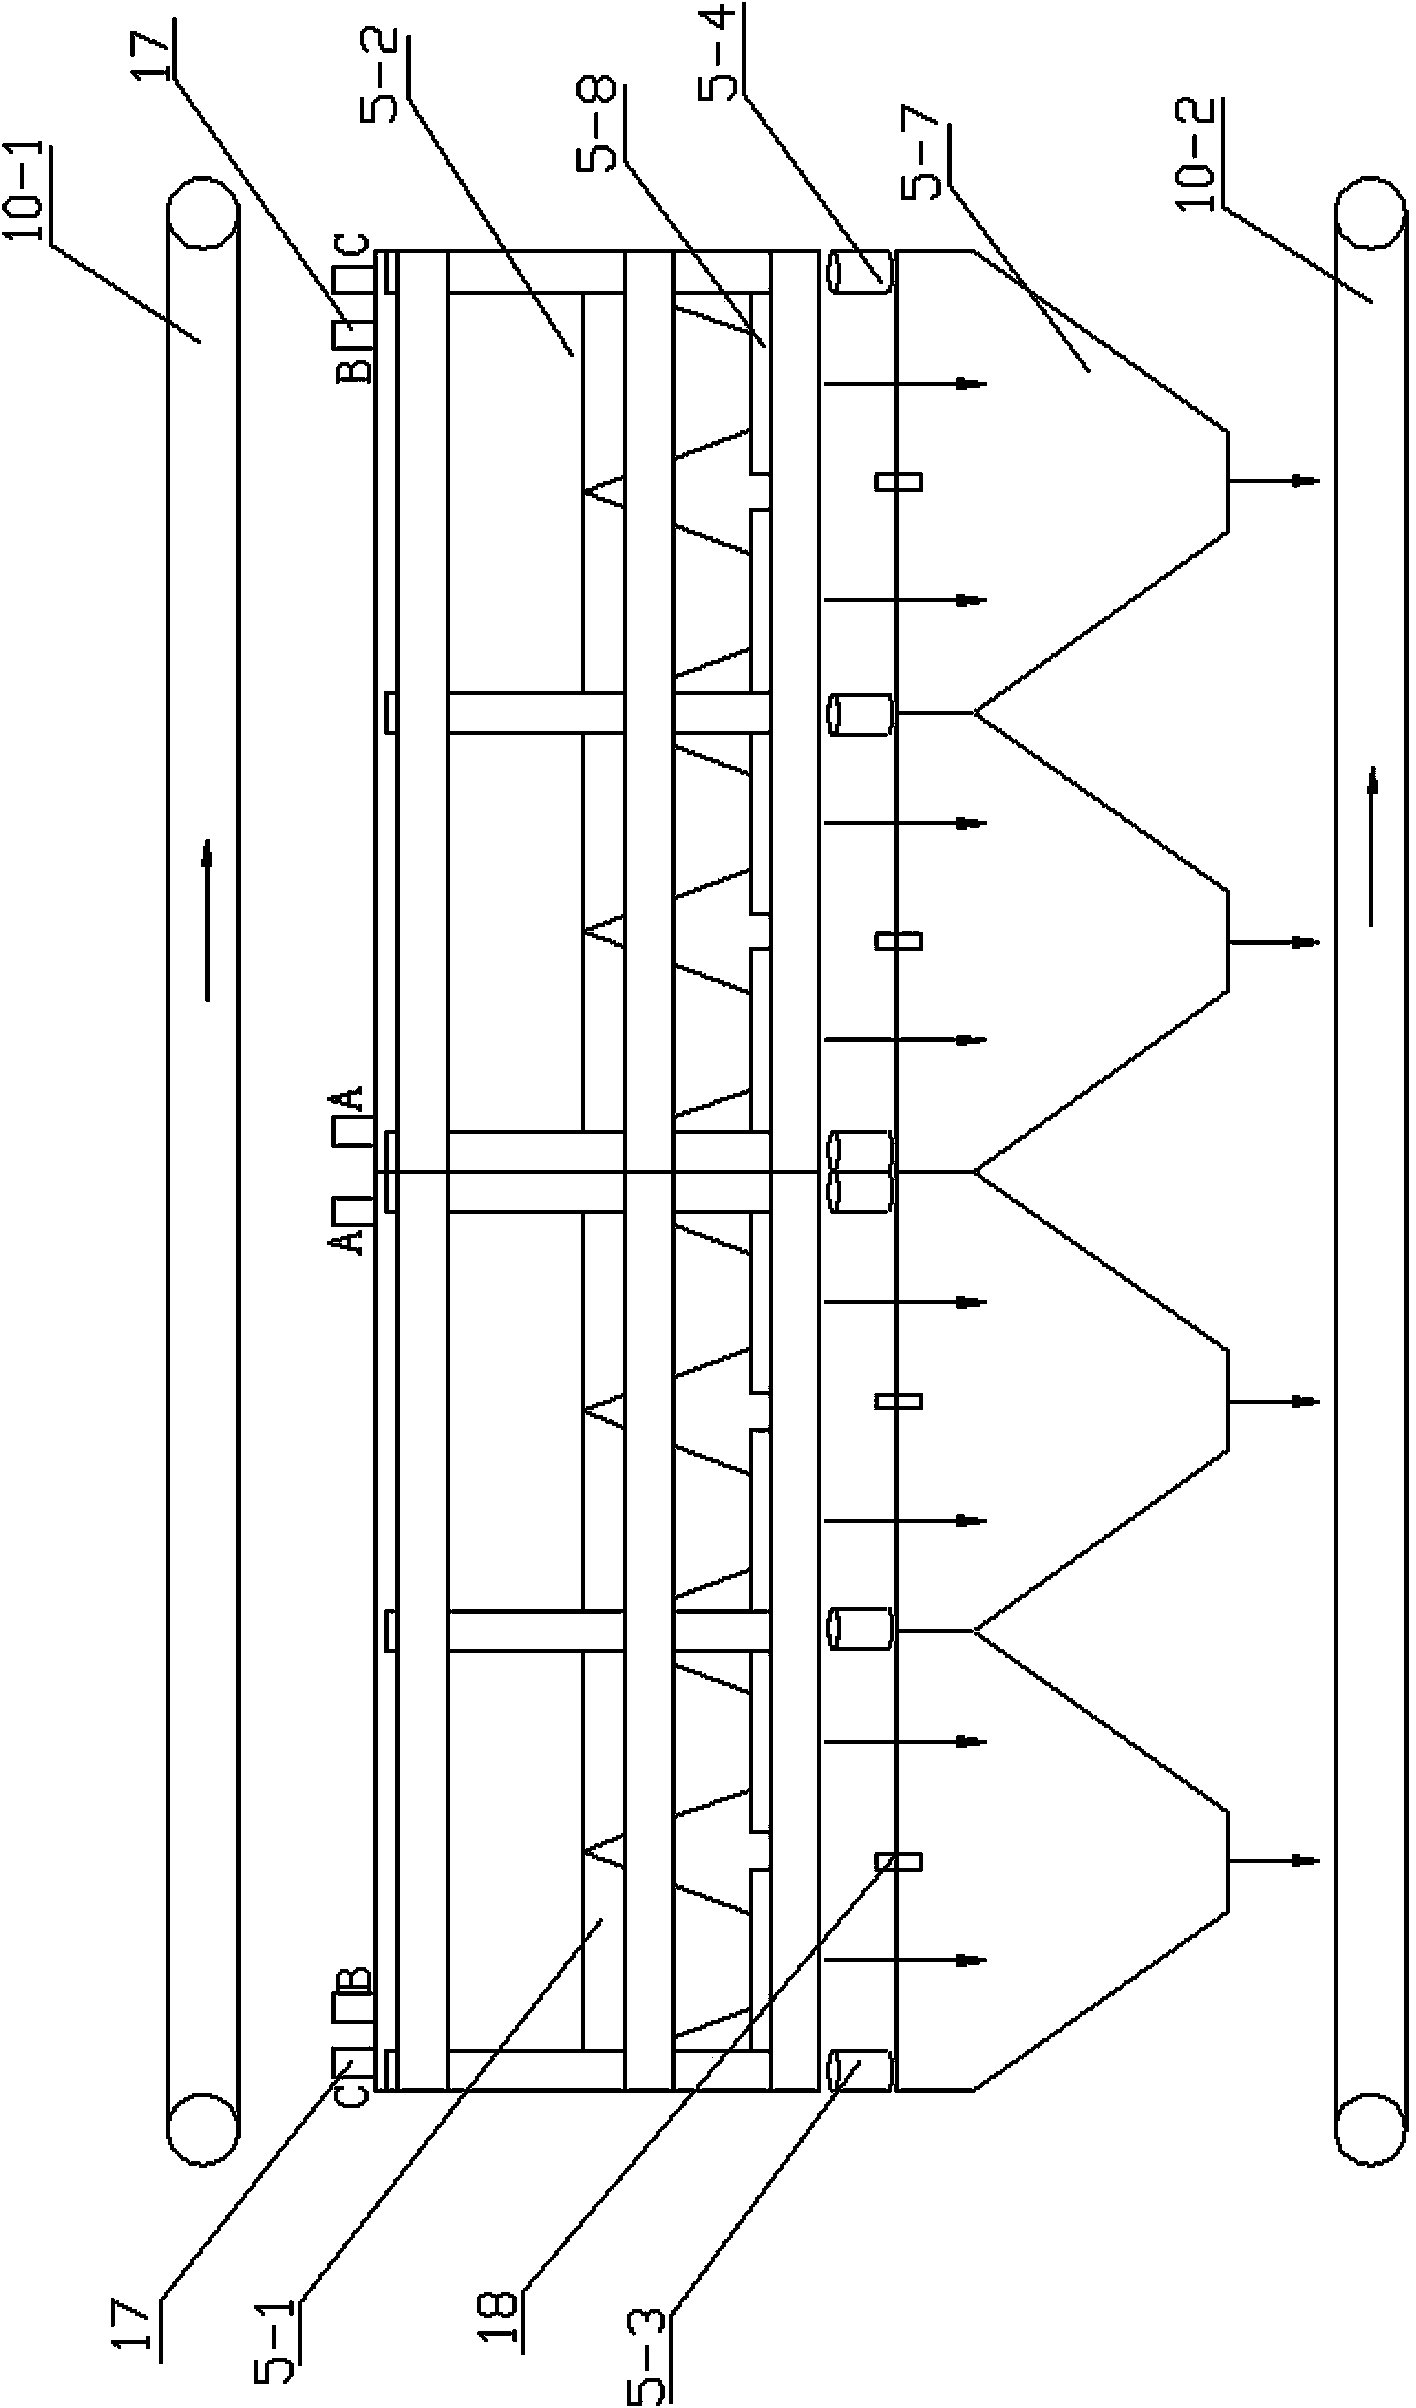 Automatic static metering system and automatic control method for continuous material unloading at dock